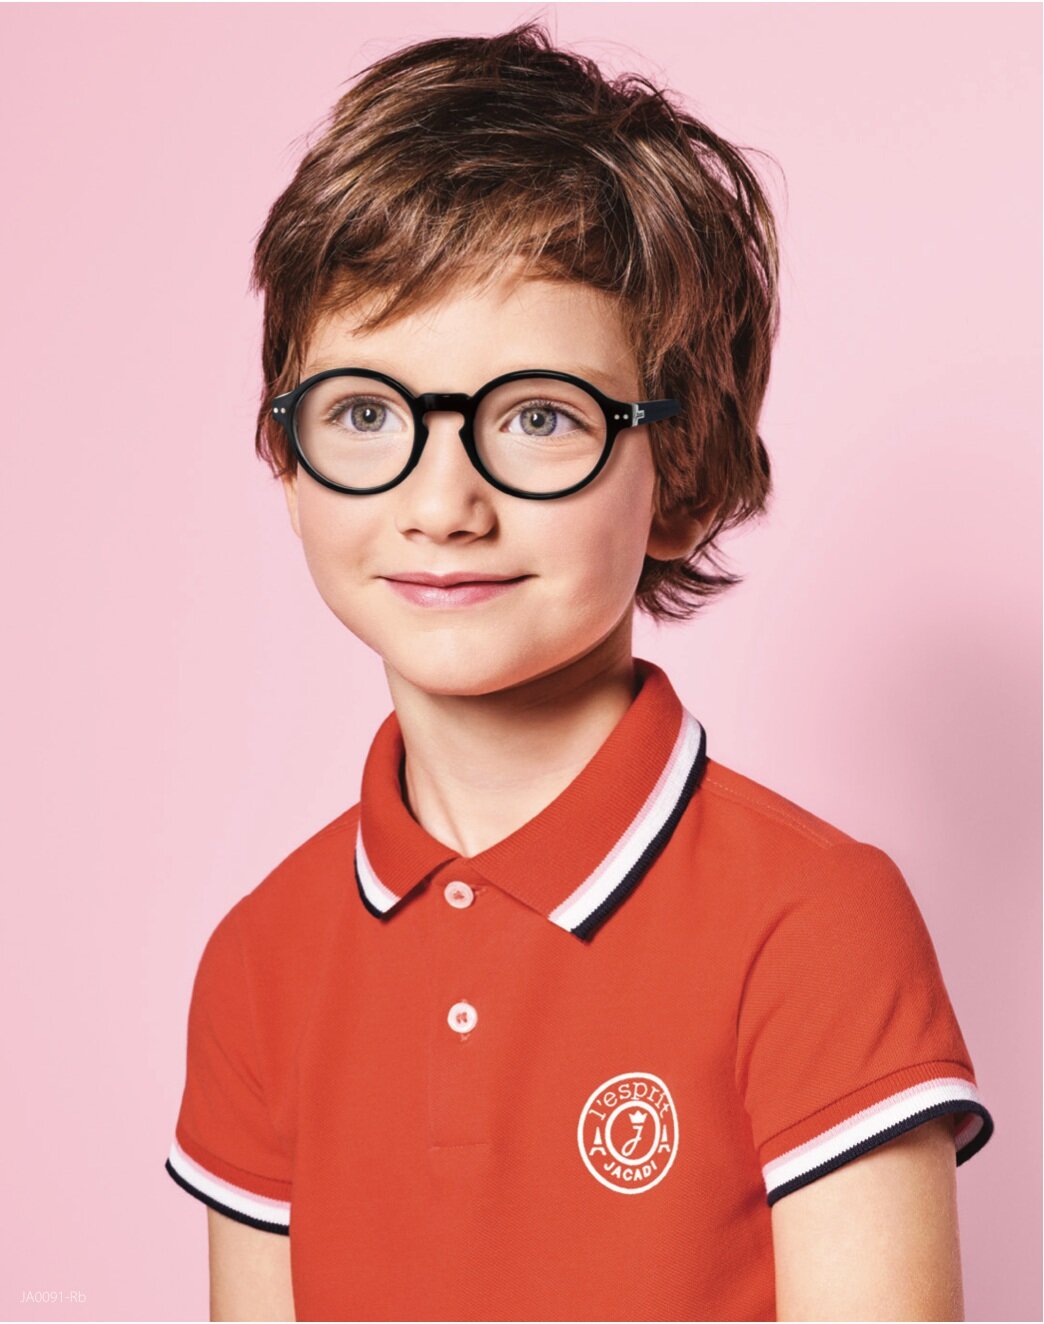 Should my 5 year old wear glasses?